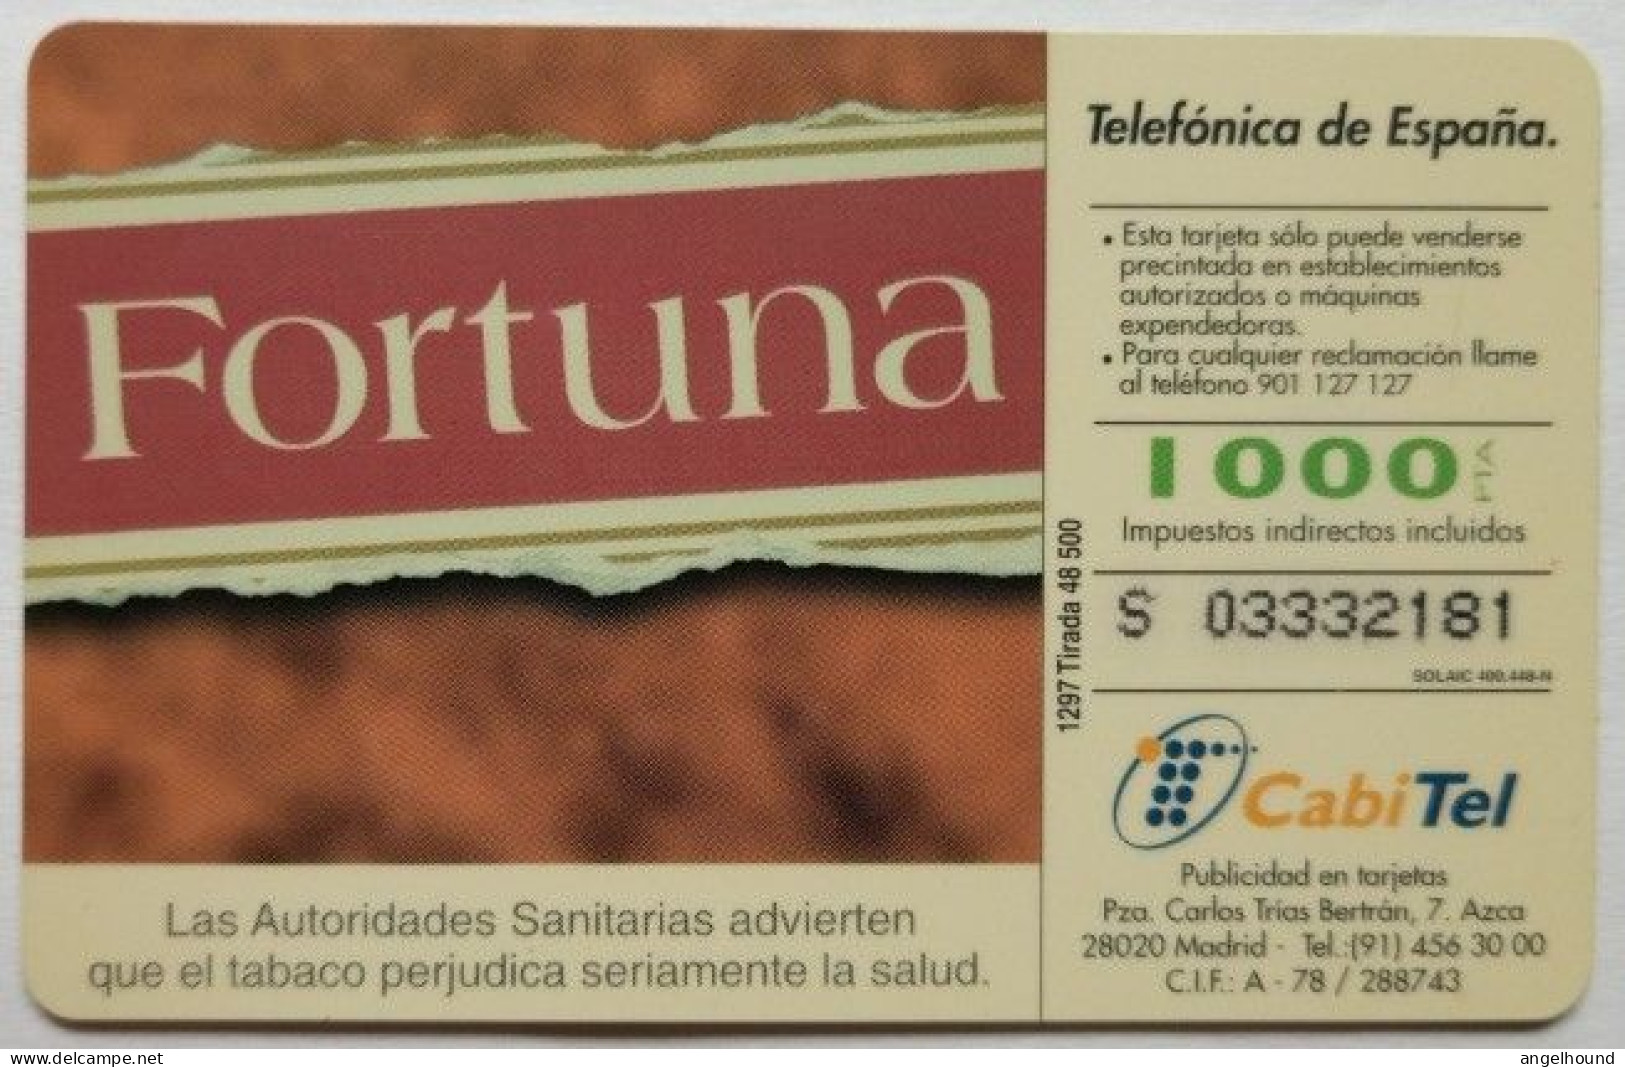 Spain 1000 Pta.  Chip Card - Fortuna ( Tobacco ) - Basic Issues